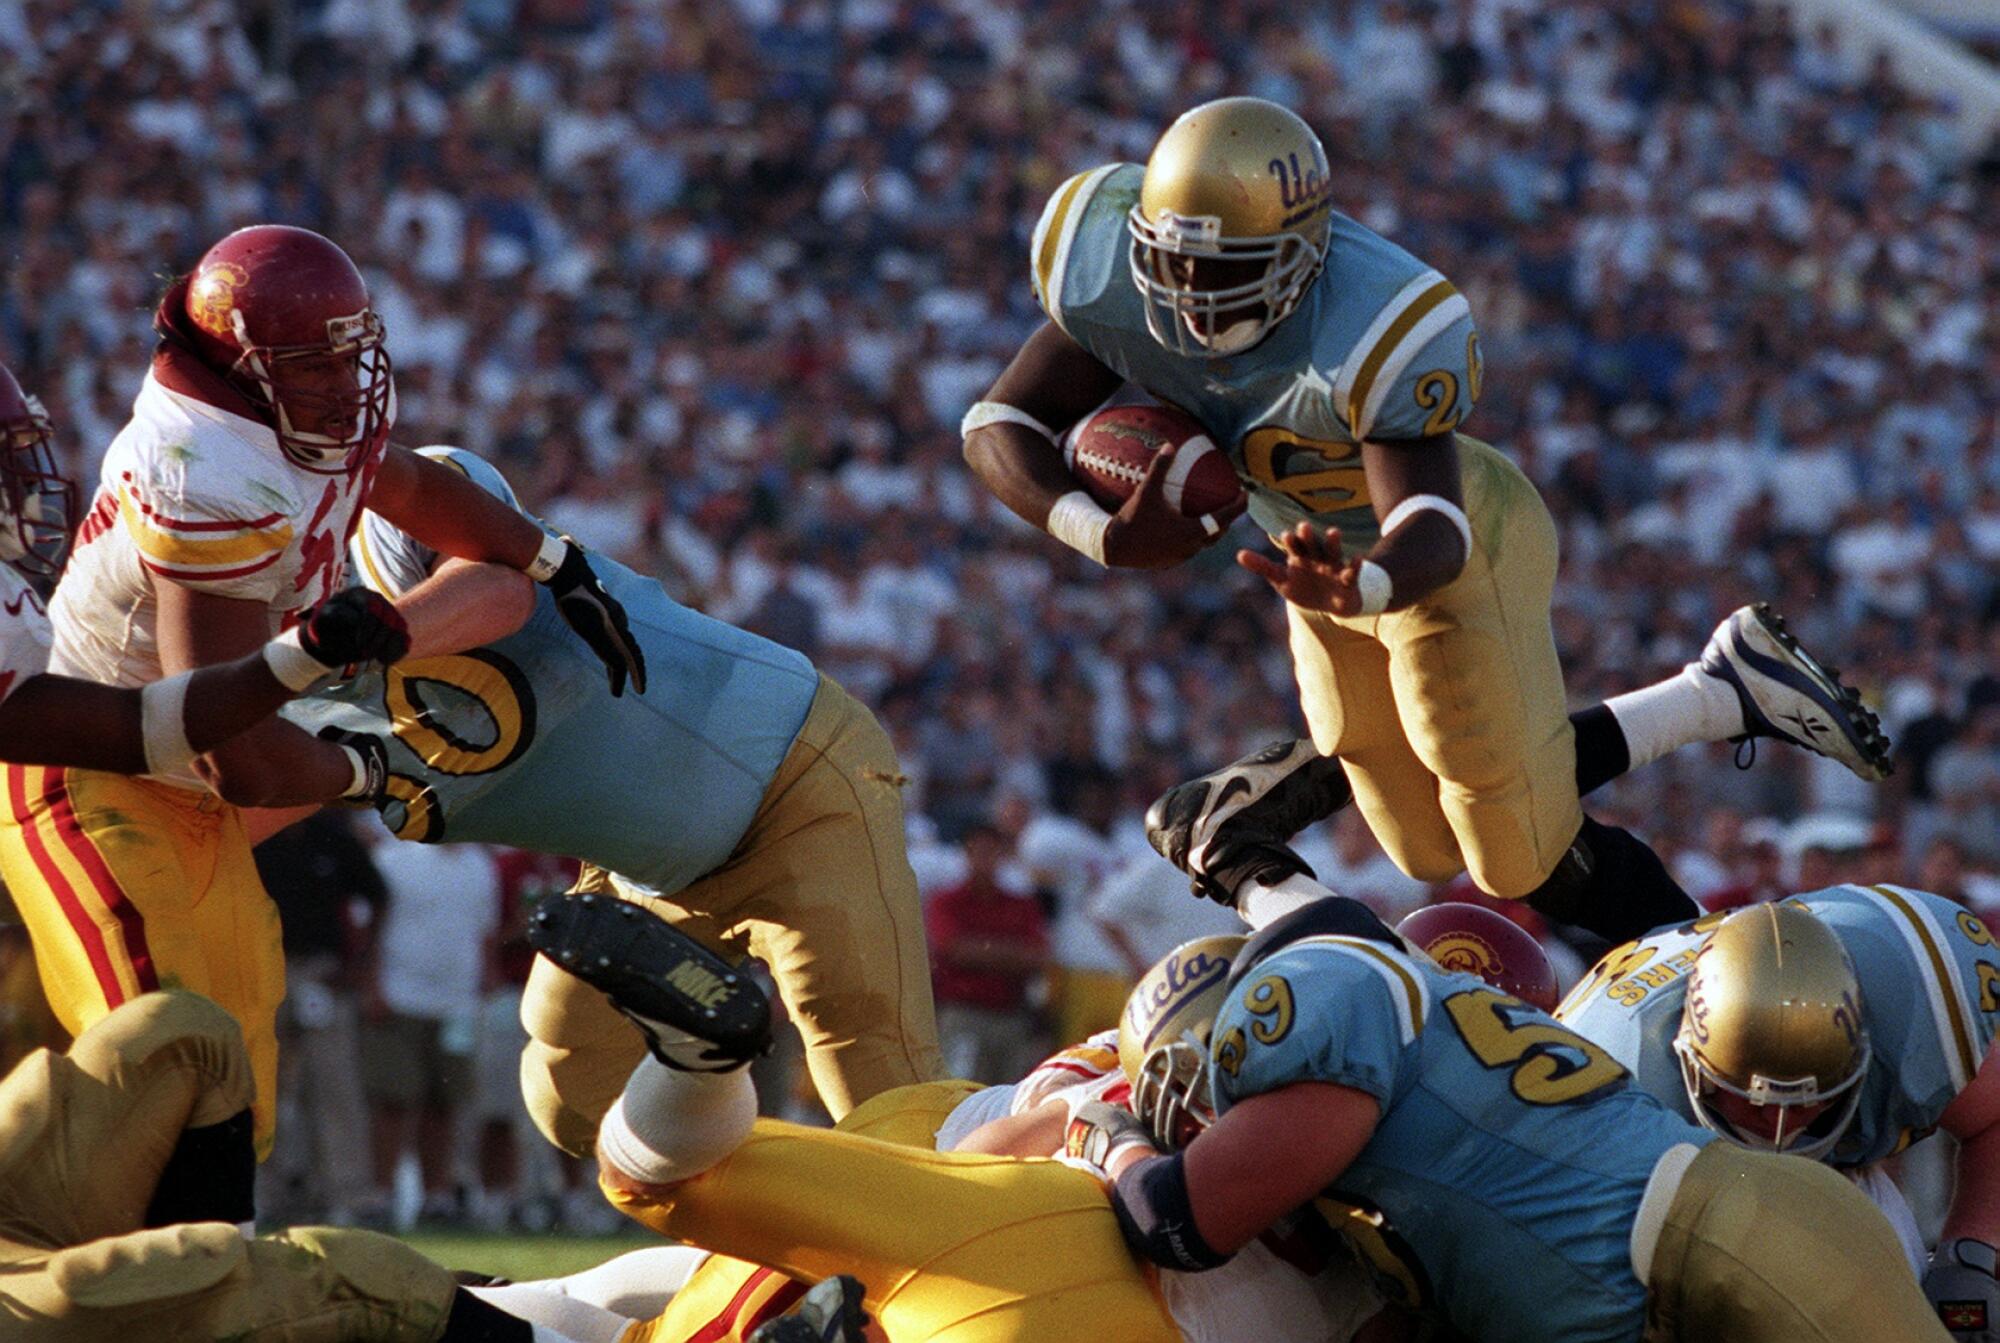 UCLA running back DeShaun Foster (26) leaps into the end zone for his fourth touchdown against USC.